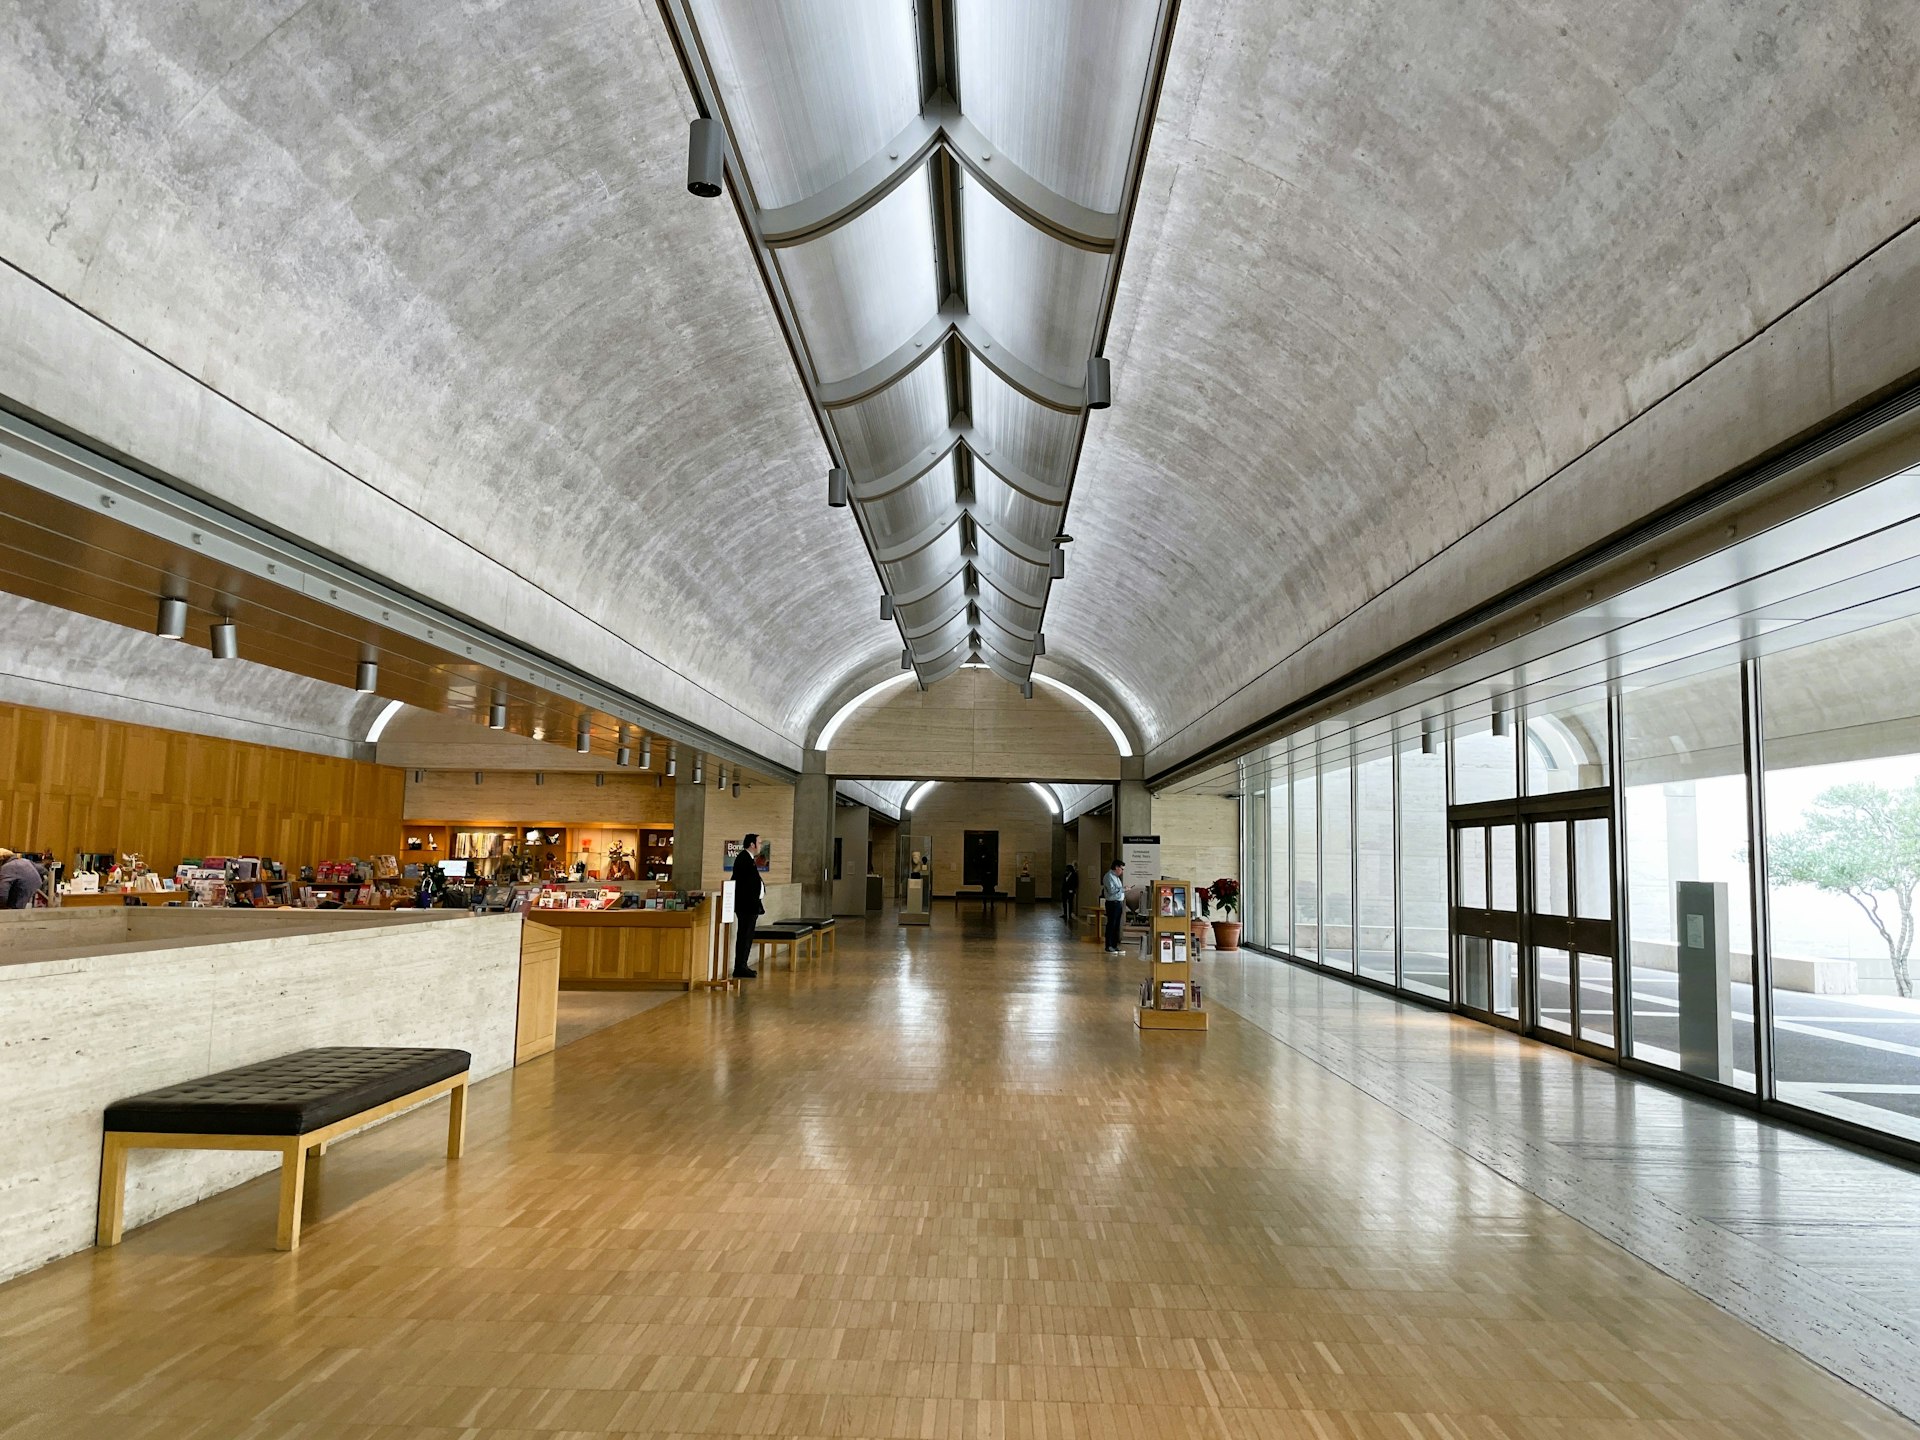 An interior shot of the Kimbell Art Museum designed by Louis Kahn, Fort Worth, Texas, USA